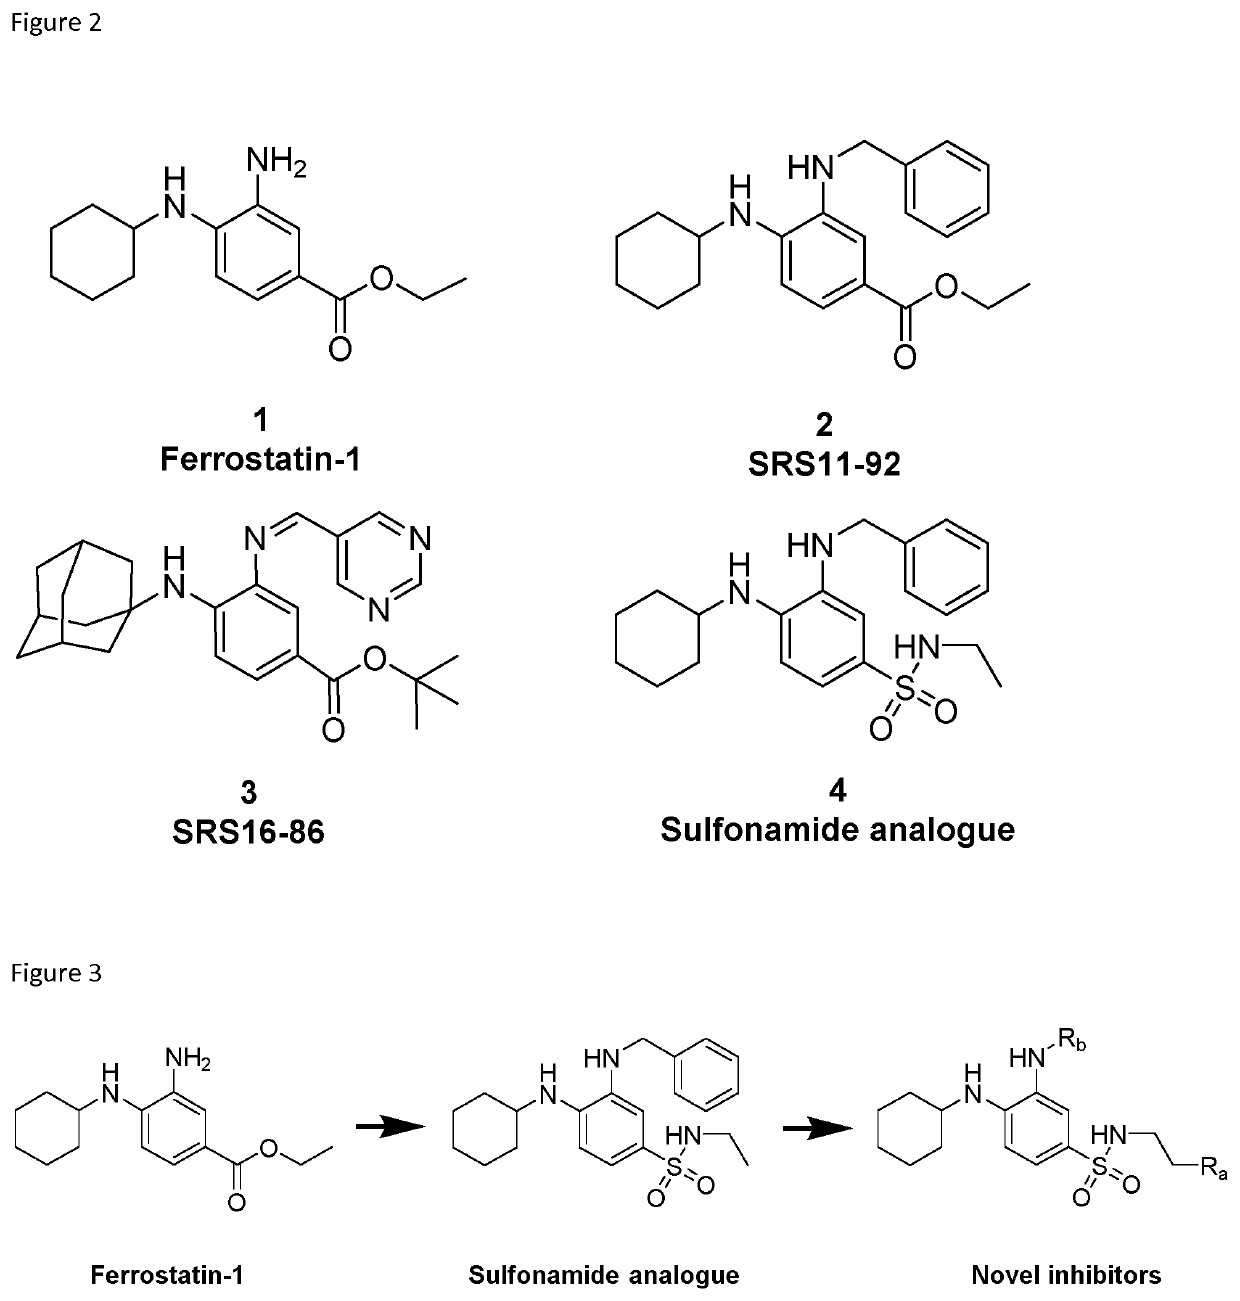 3-(benzylamino)-4-(cyclohexylamino)-n-(2-(piperazin-1-yl)ethyl)benzenesulfonamide derivatives and related ferrostatin-1 analogues as cell death inhibitors for treating e.g. stroke